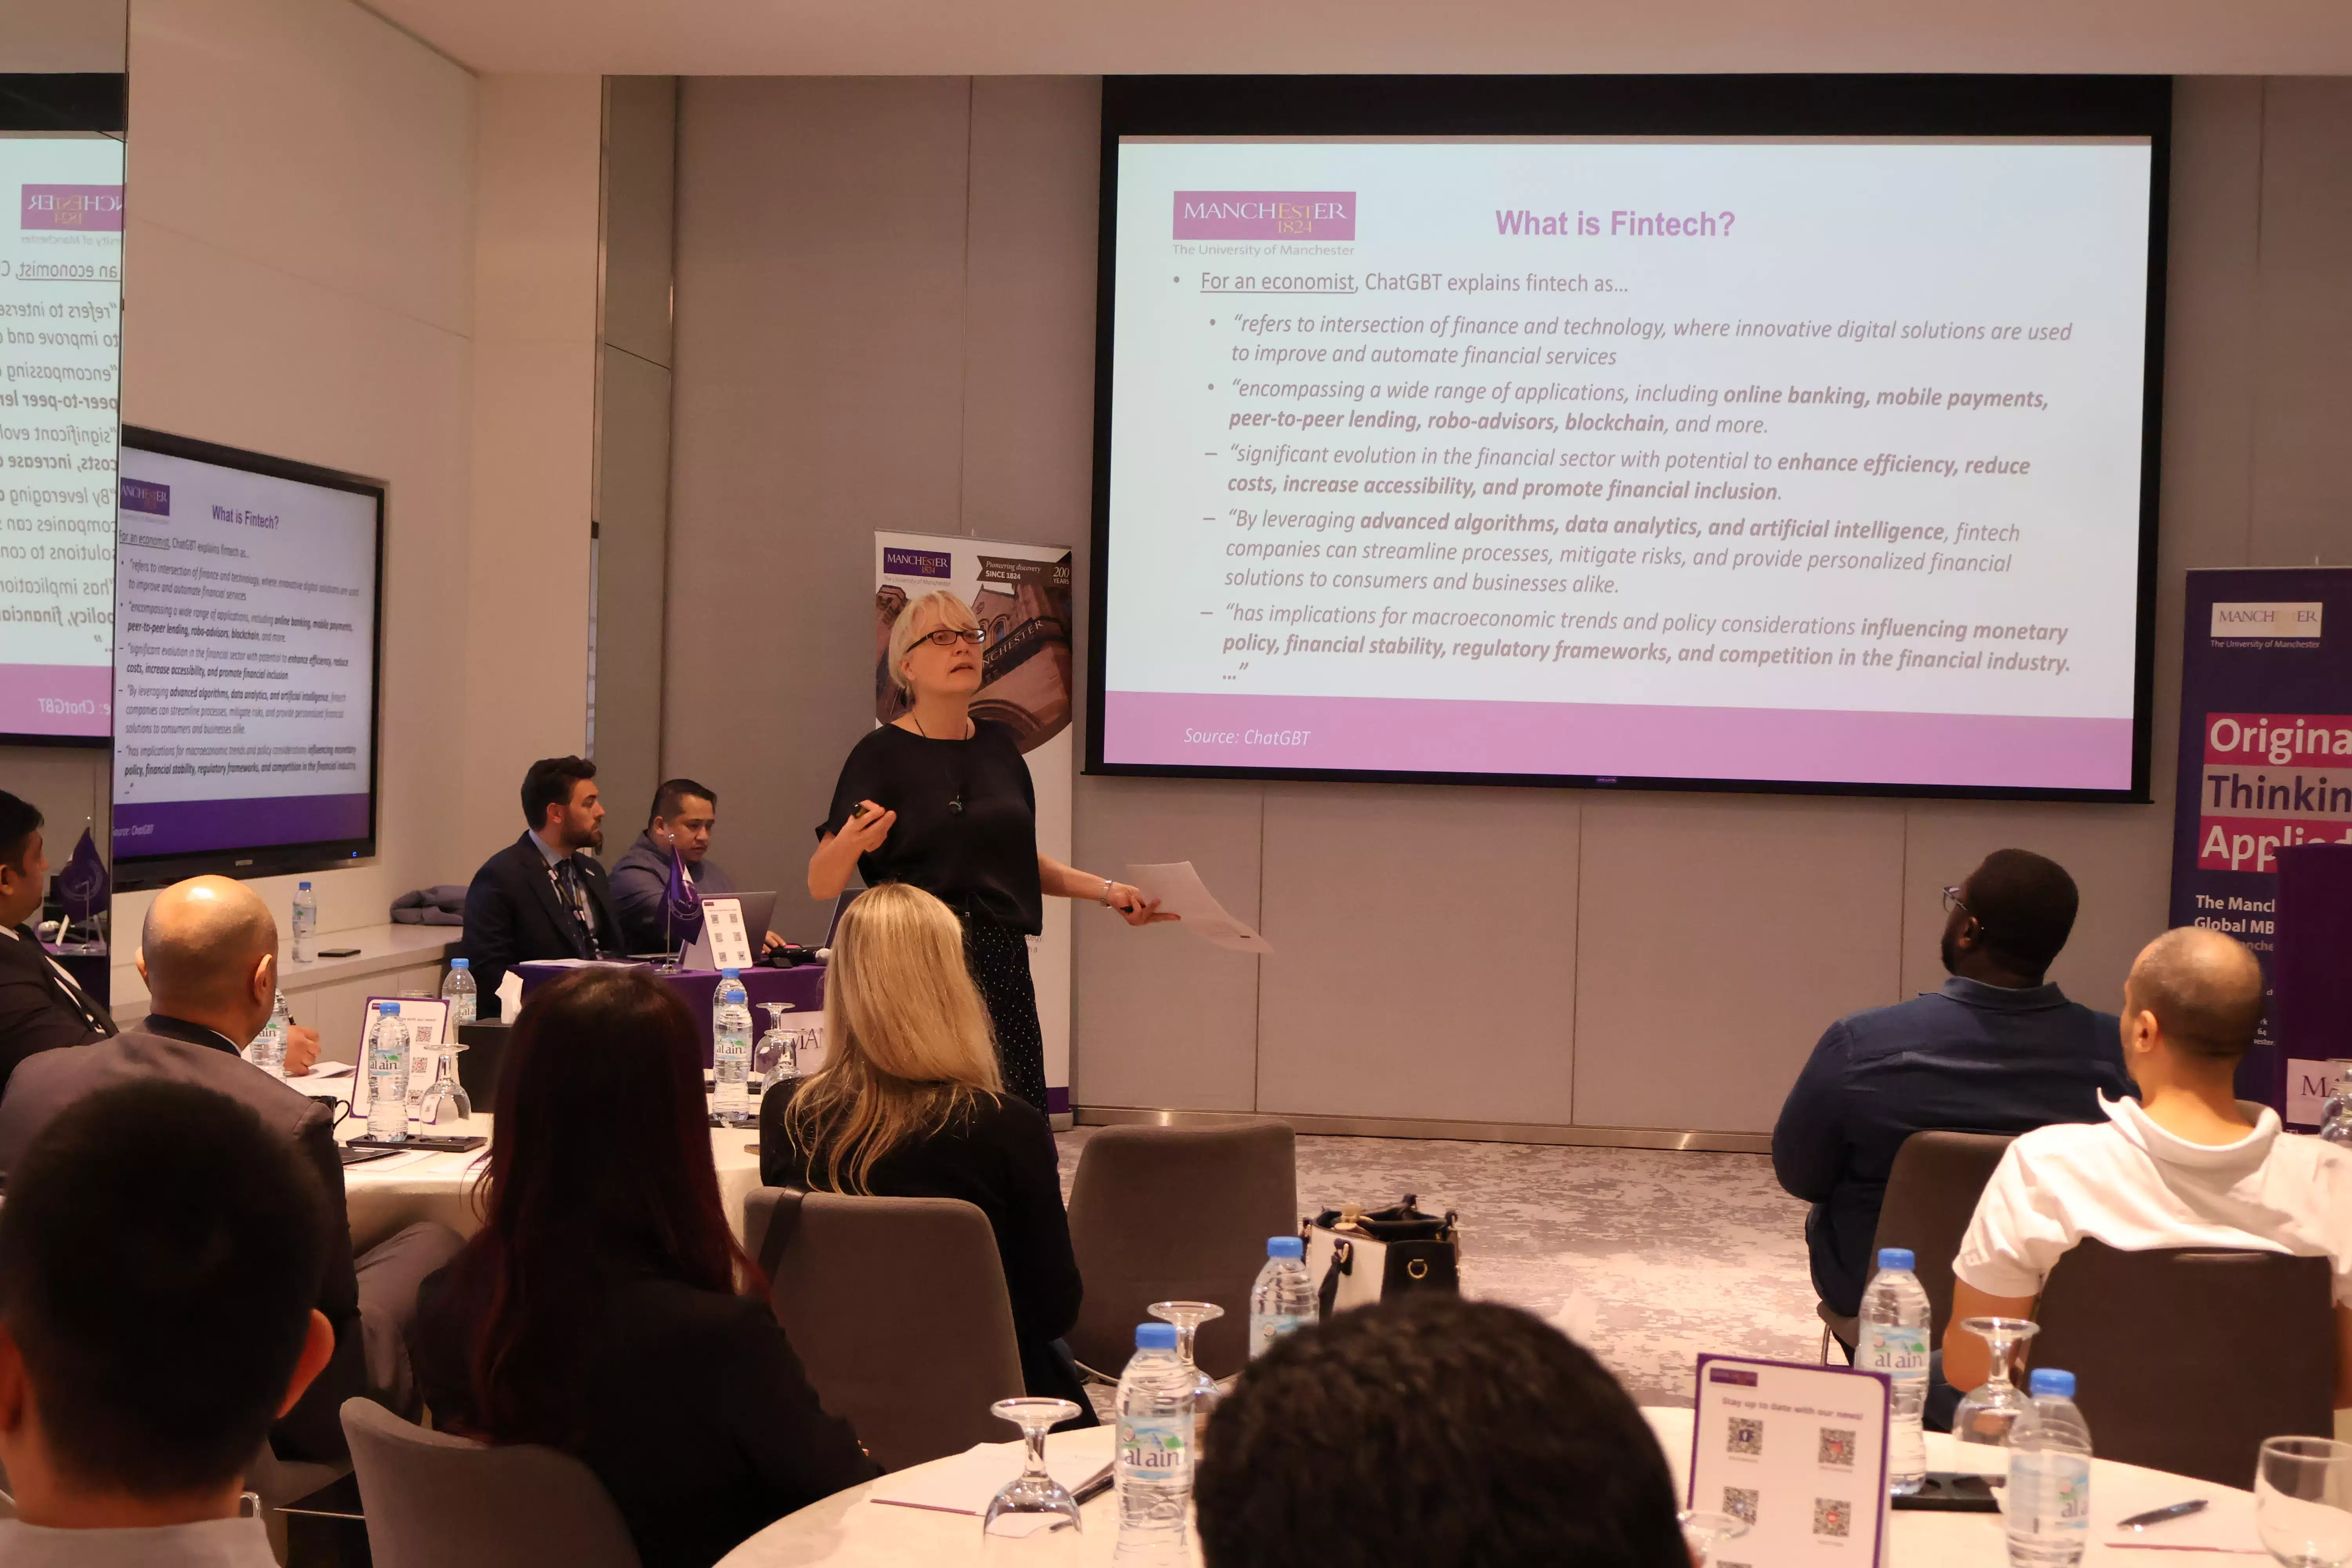 Masterclass: FinTech 4.0 - the growing world of FinTech in the Middle East